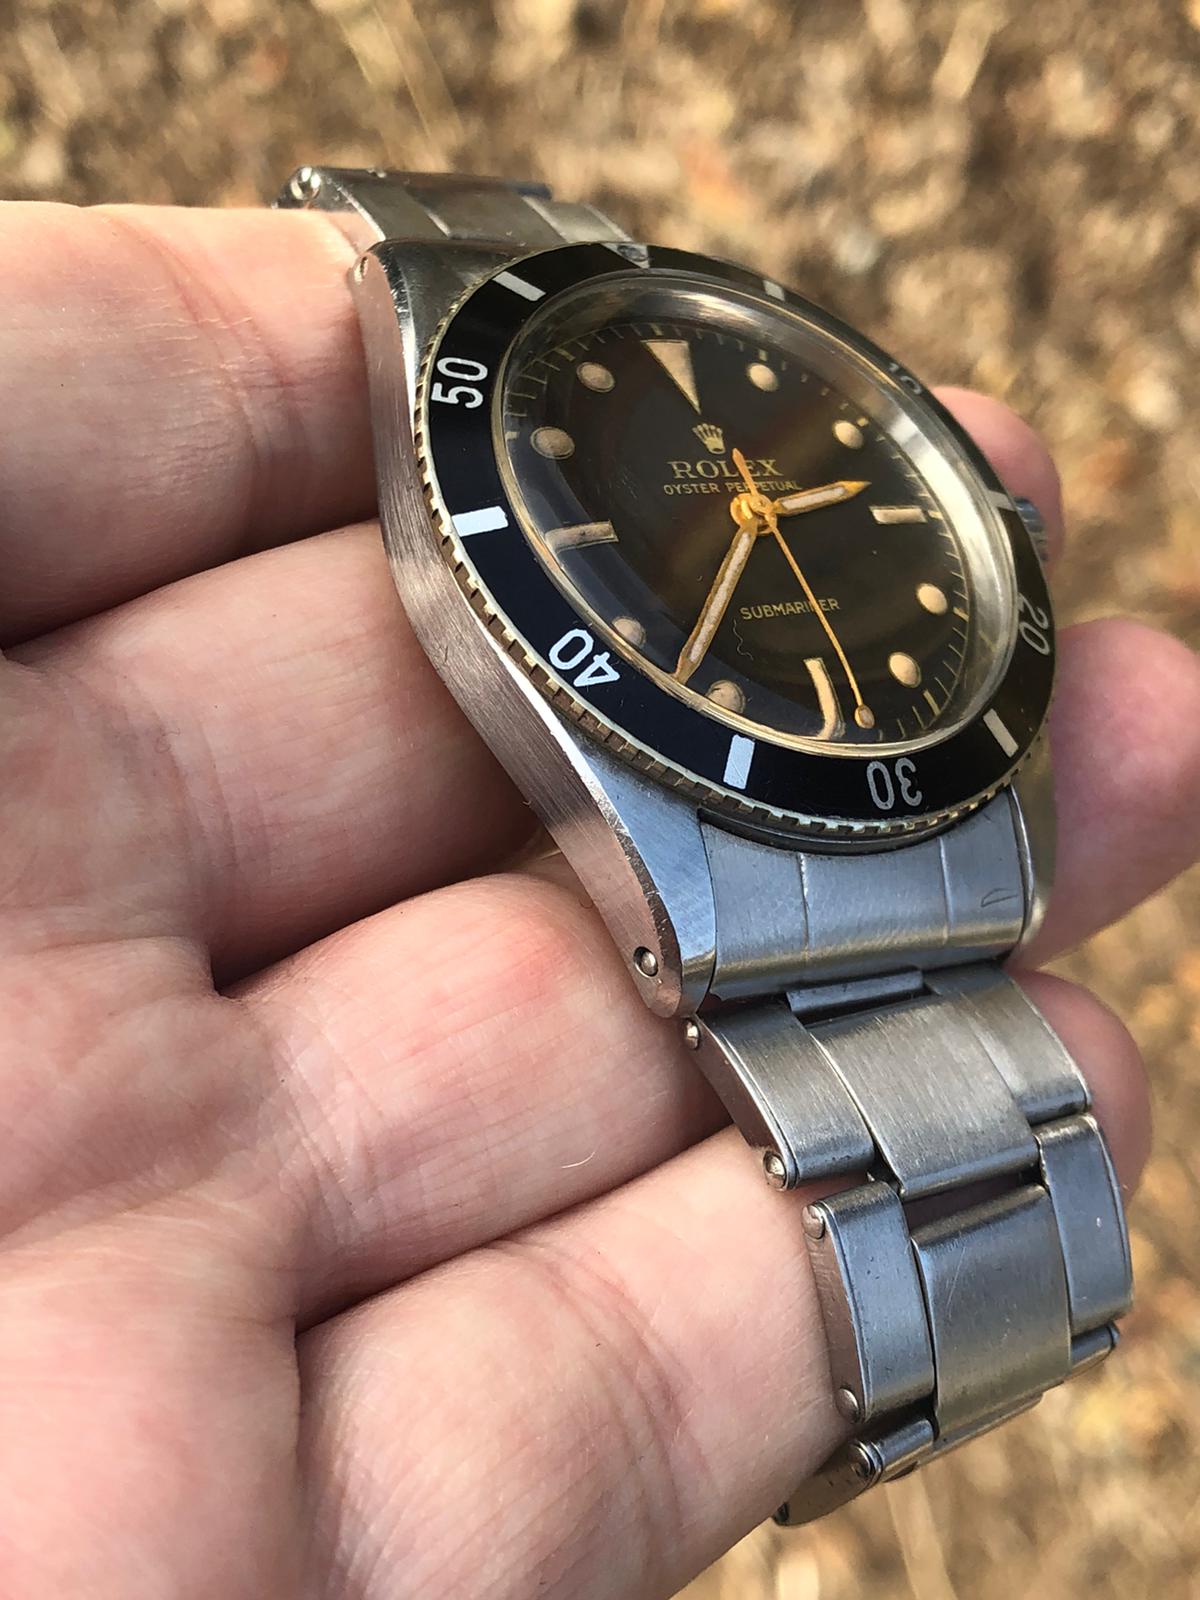 SOLD Submariner 6205 1954 Gilt sub only / Super Rare / Tropical